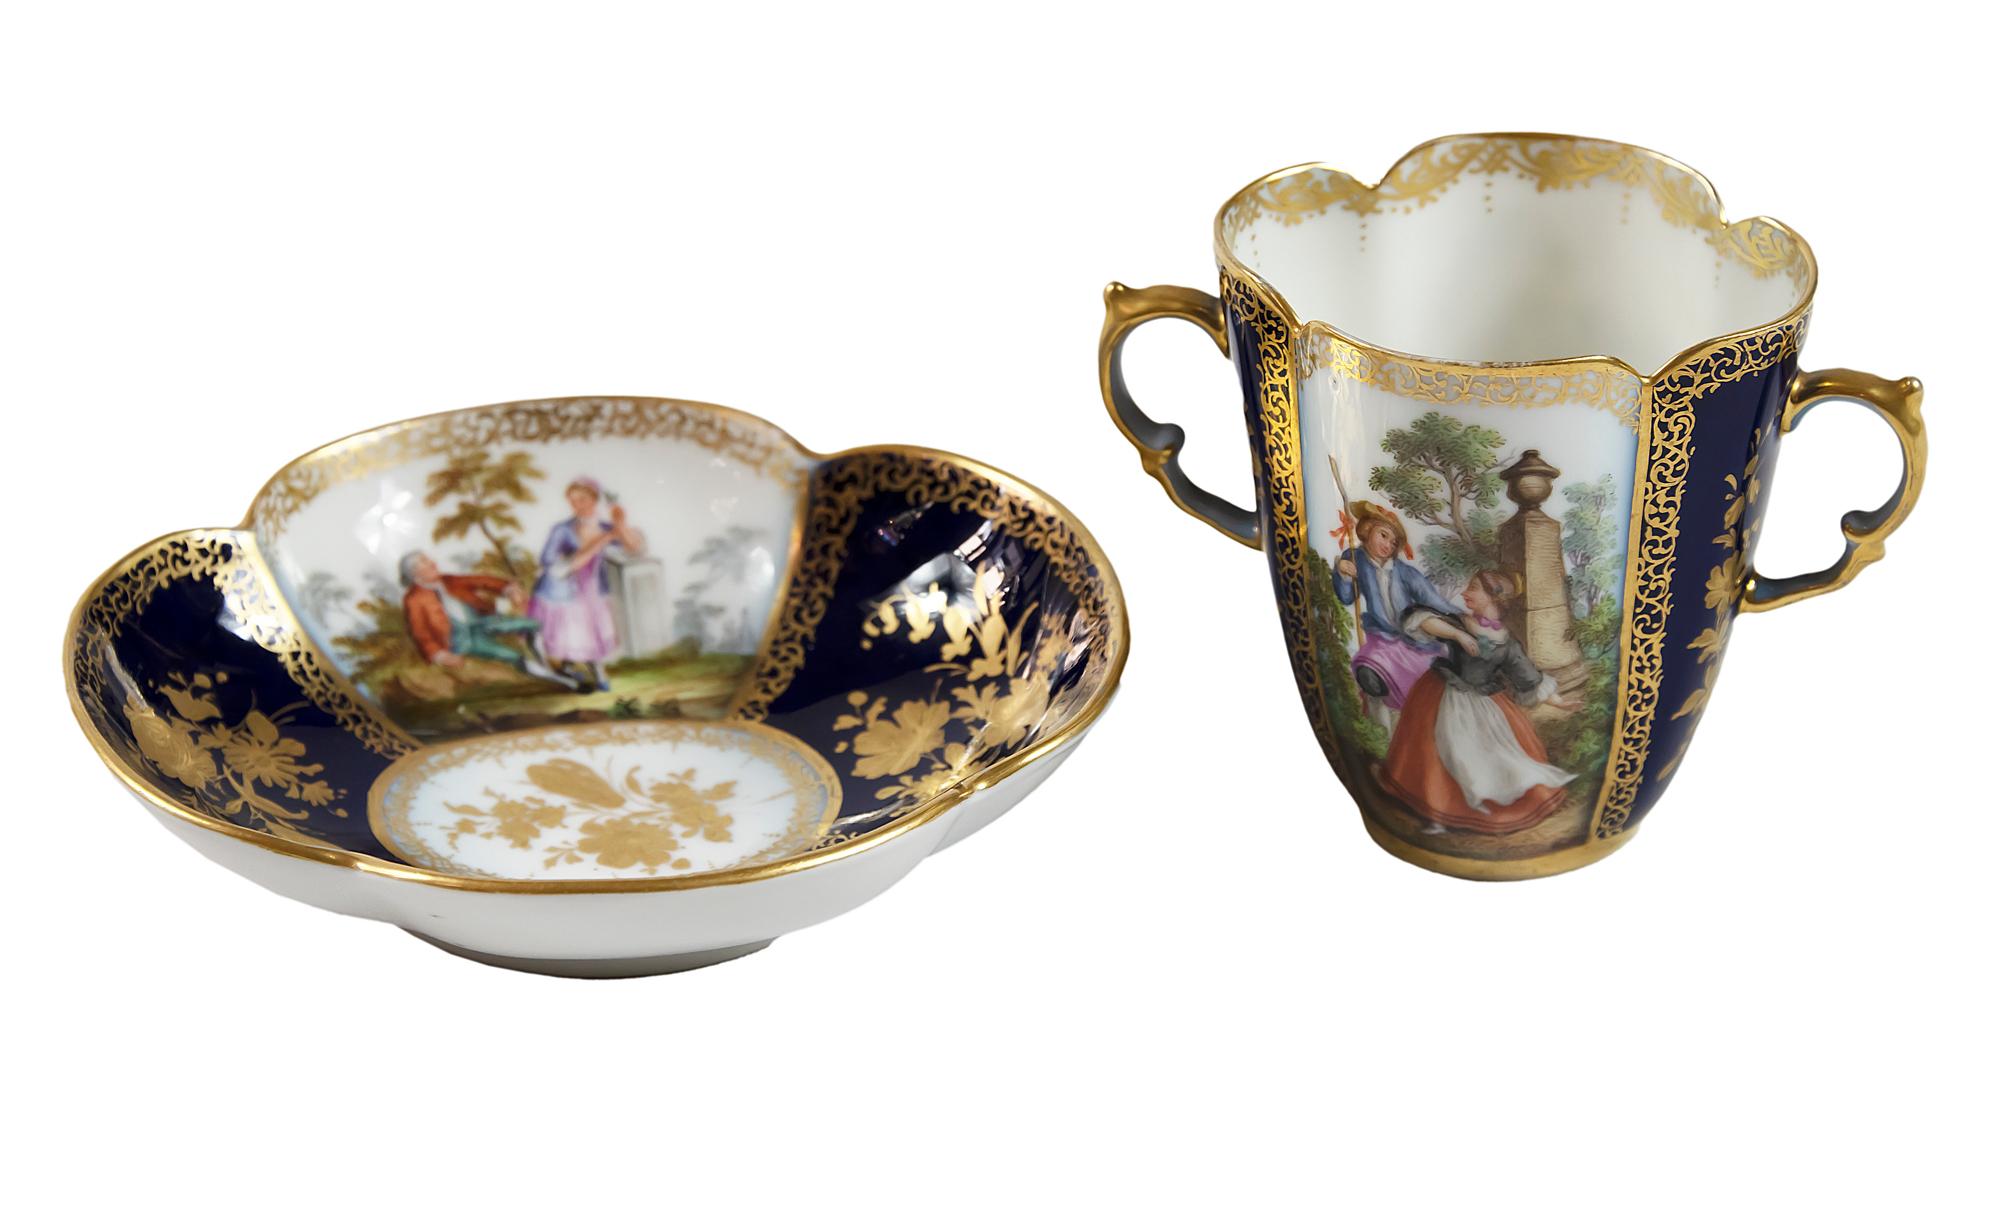 Antique porcelain Augustus Rex Helena Wolfsohn chocolate cup with saucer decorated with cobalt, gold and hand painted romantic scenes.
Measures:
Cup: 8.2 (H) x 11.5 x 7 cm
Saucer: 3 (H) x 14 x 12.5 cm.

      